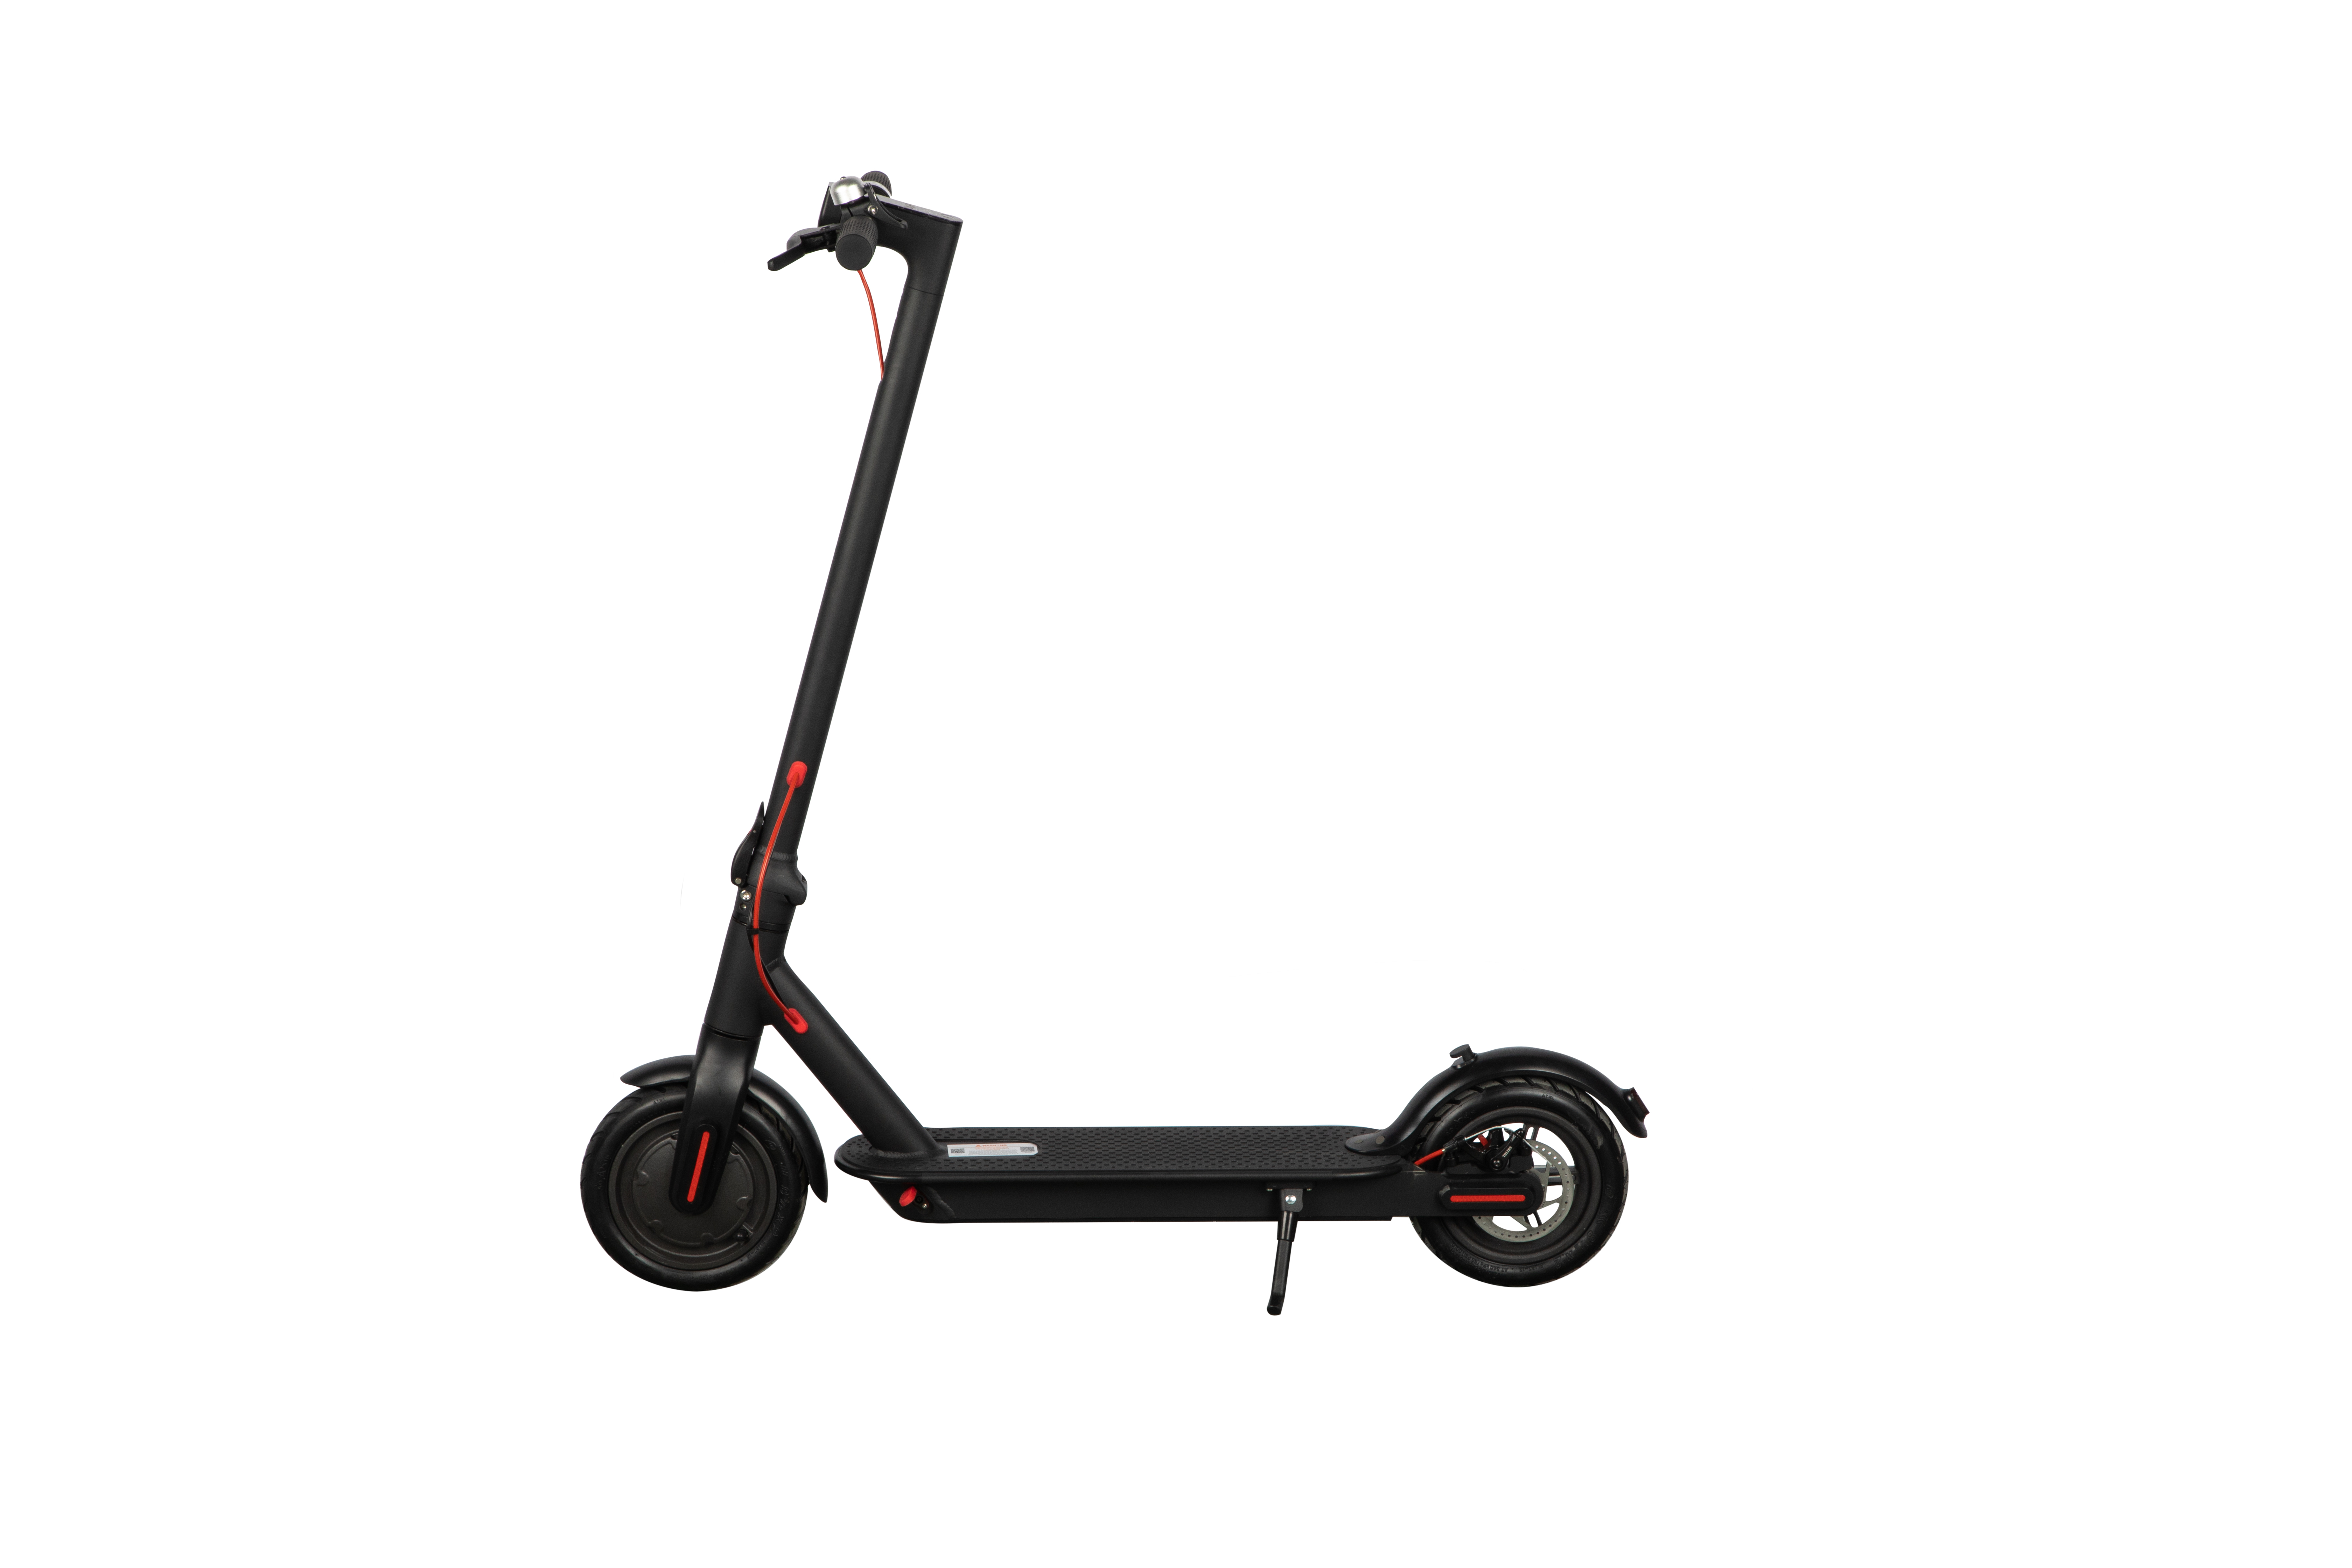  36V LITHIUM BATTERY 8 INCHES WHEEL ELECTRIC SCOOTER (XIAOMI)